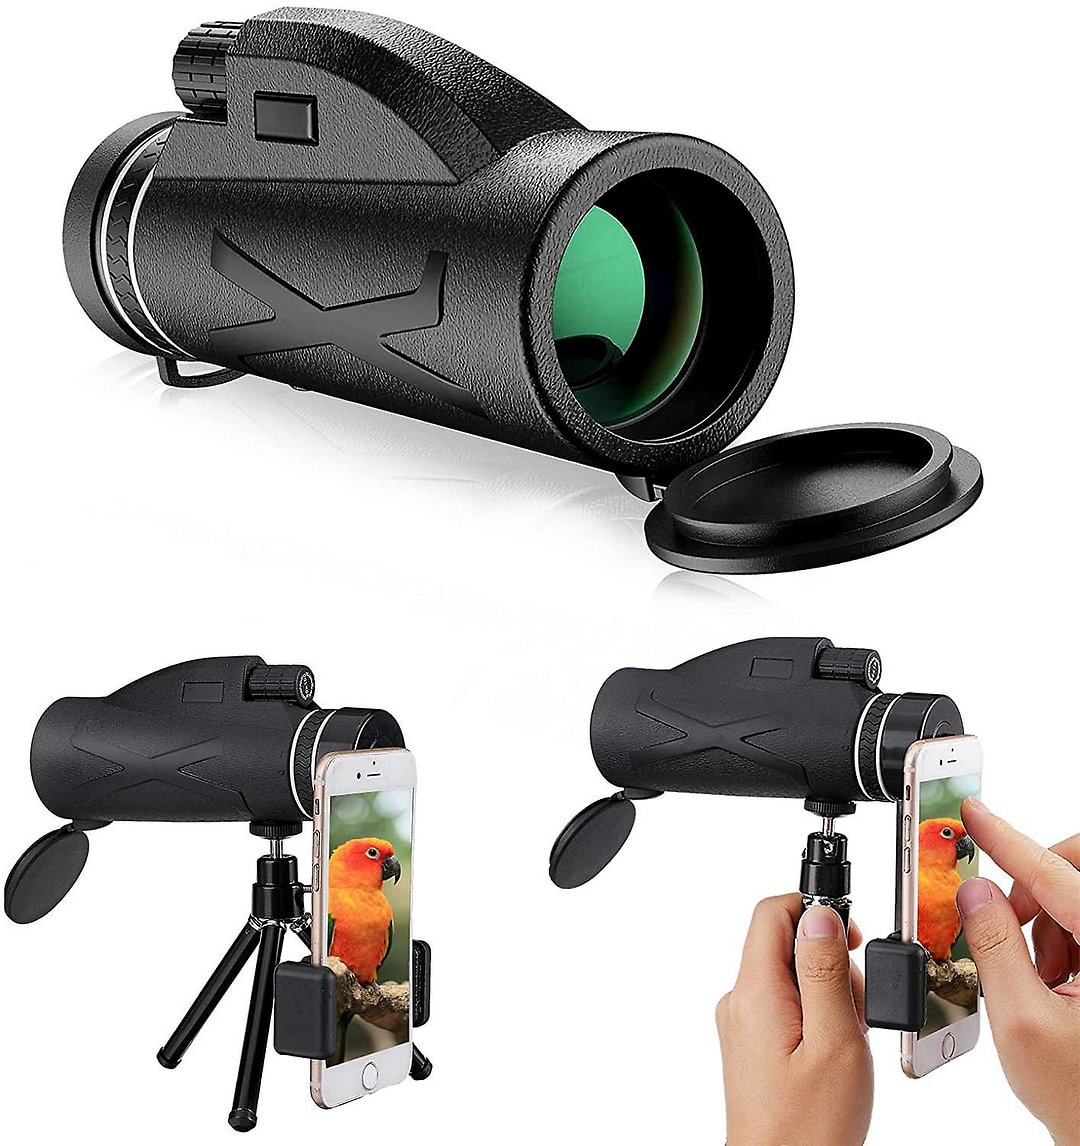 Starscope Monocular Telescope, 12x50hd Telescope, With Mobile Phone Holder And Tripods Waterproof An